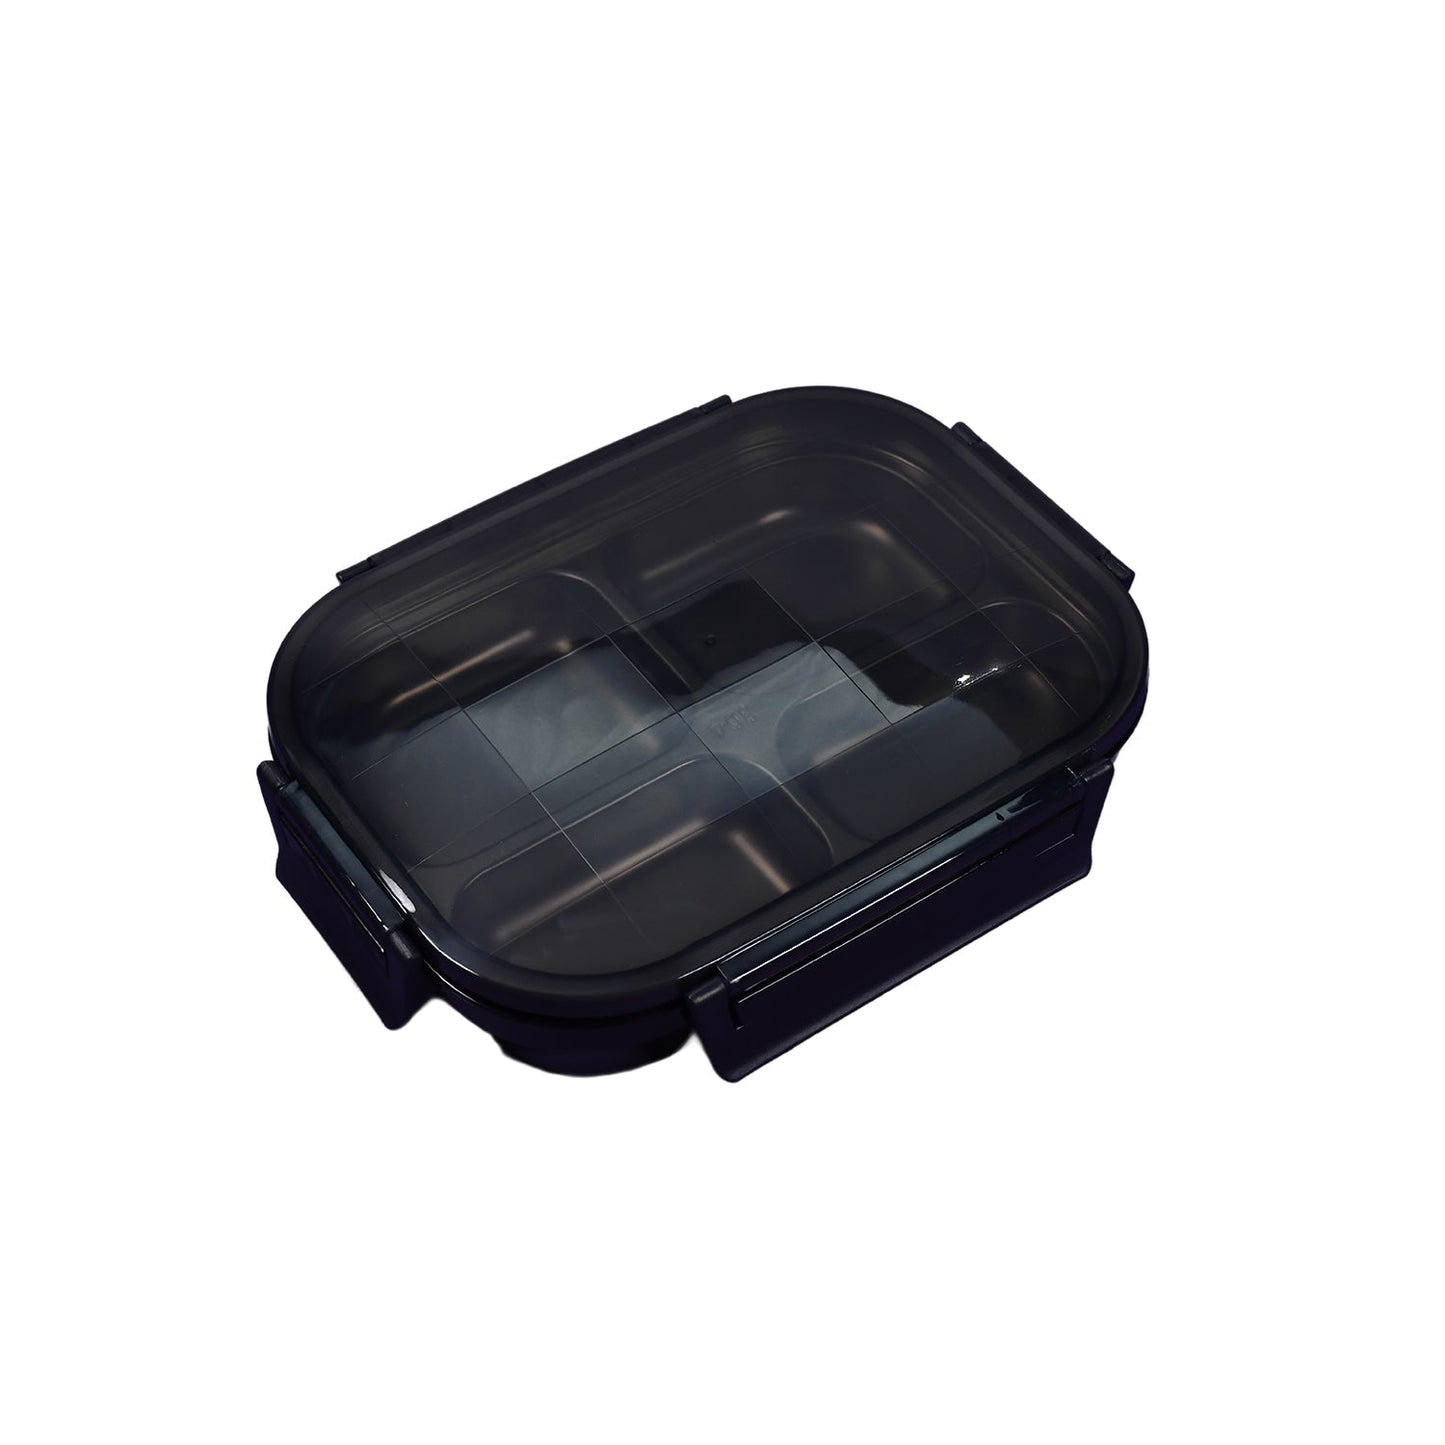 2979 Black Transparent 4 Compartment Lunch Box for Kids and adults, Stainless Steel Lunch Box with 4 Compartments. DeoDap